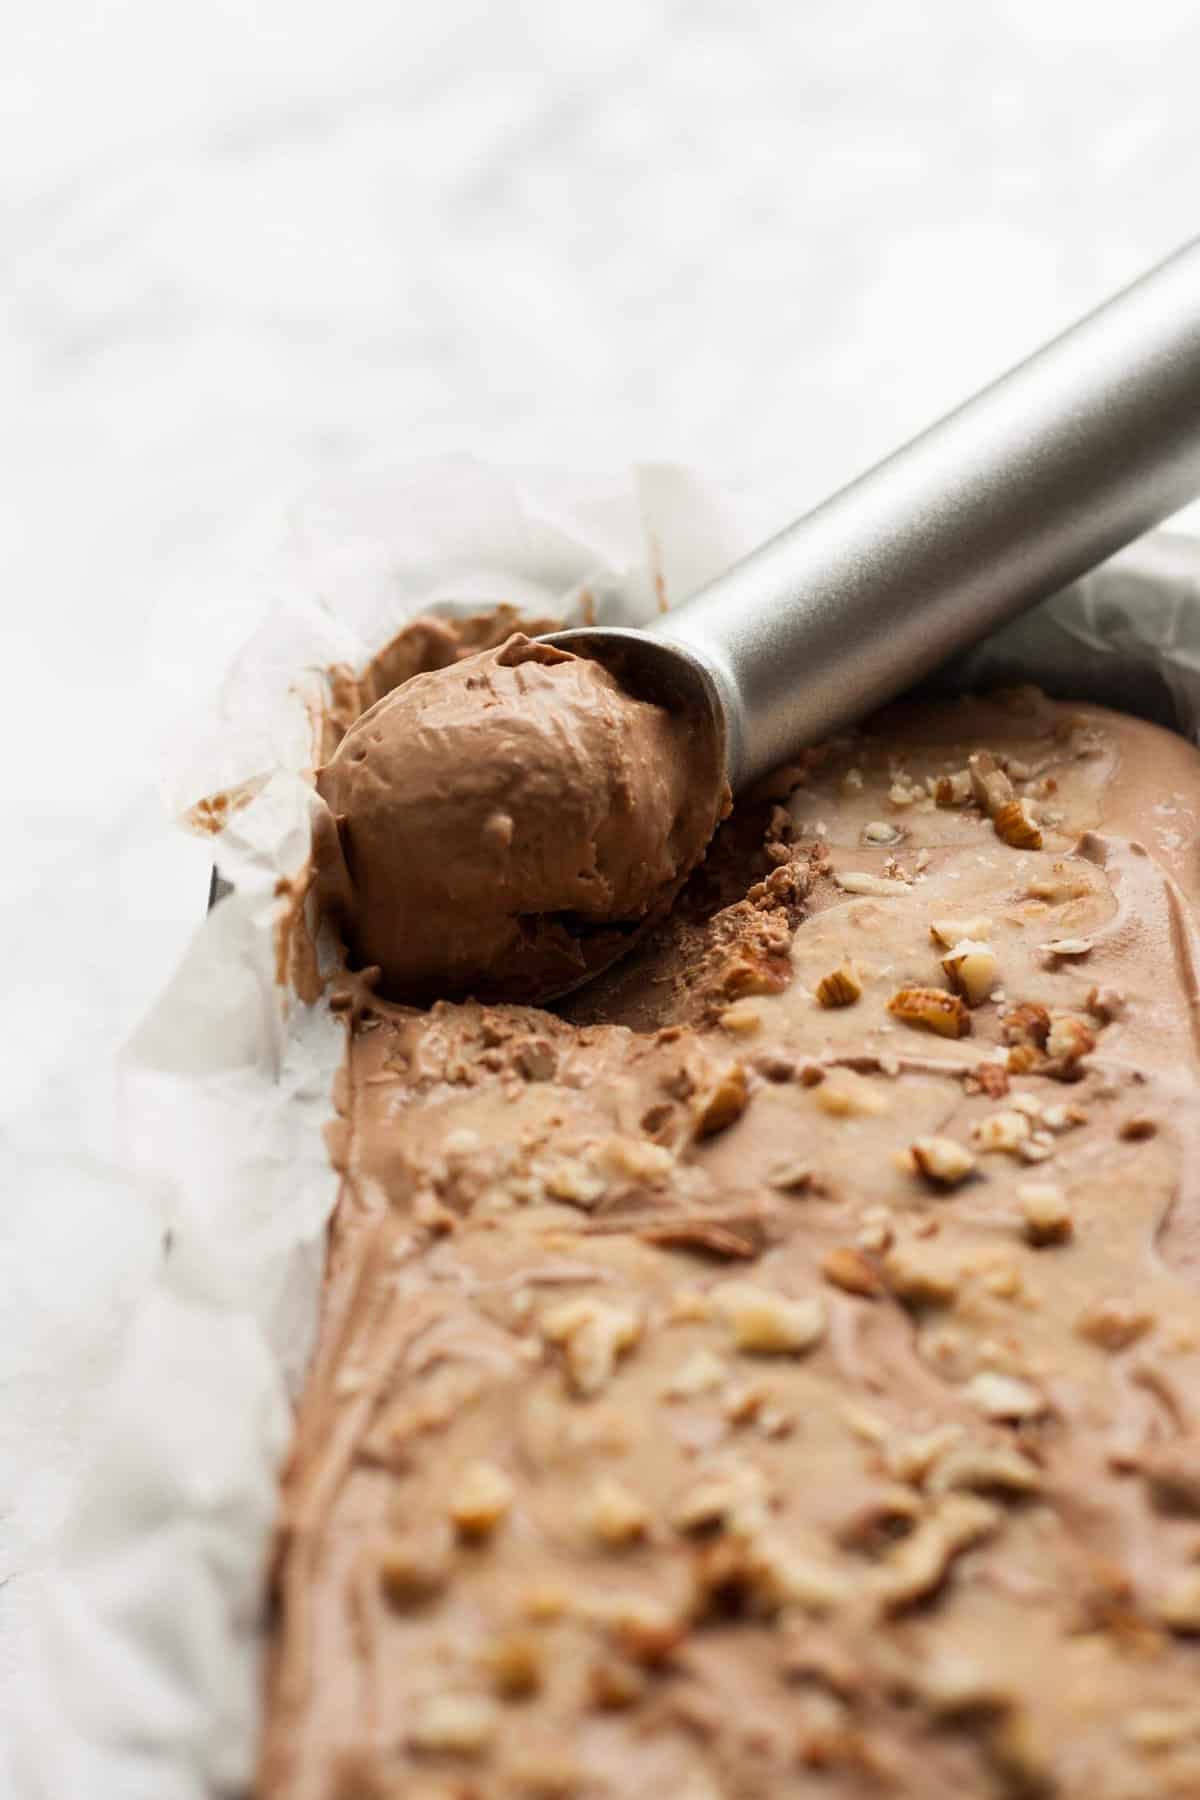 An ice cream scoop scooping mocha ice cream from the loaf tin lined with parchment.